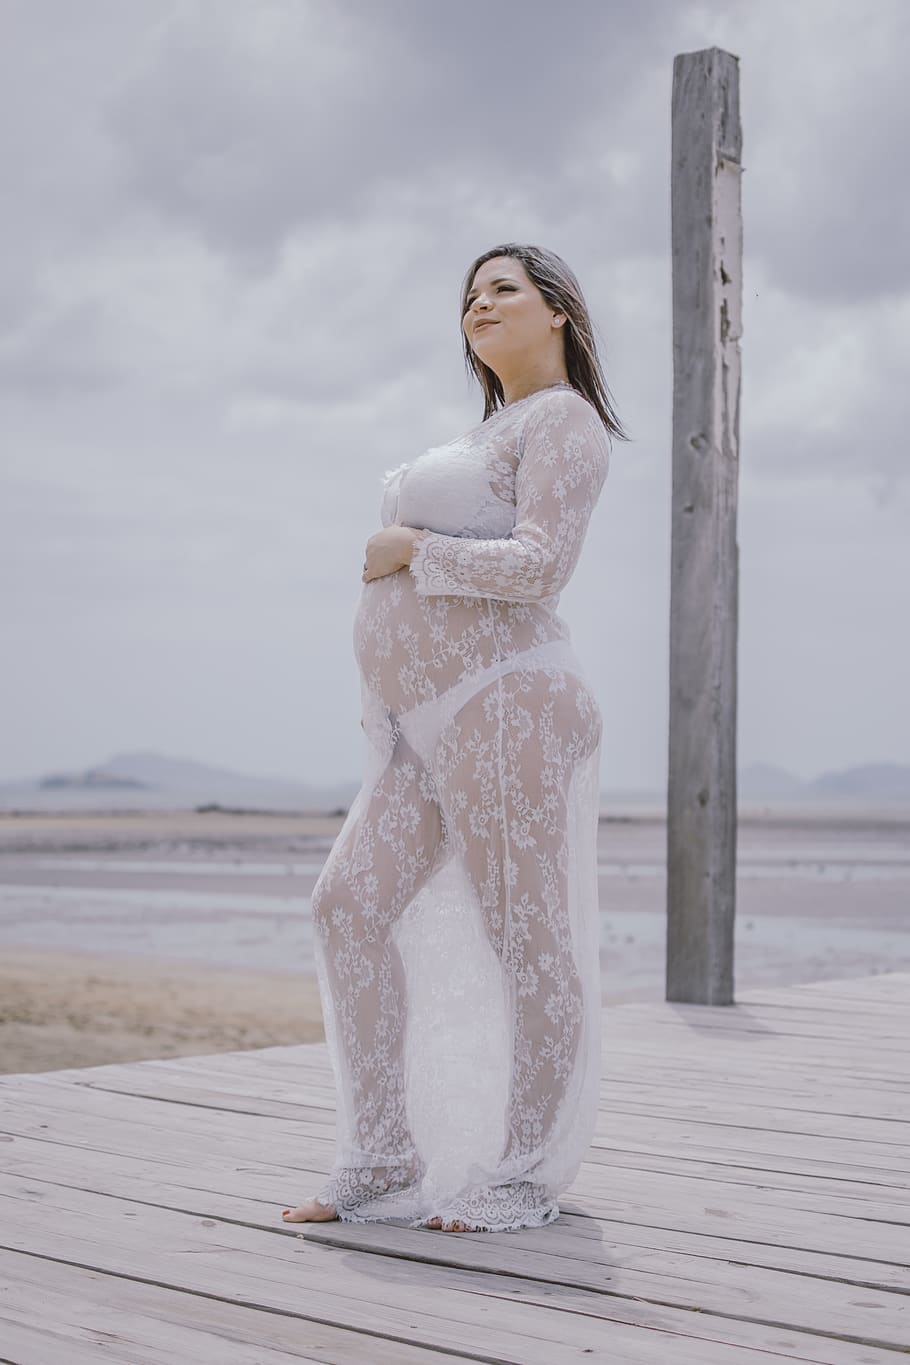 Pregnant Woman Wearing Mesh Dress Standing on Dock, attractive